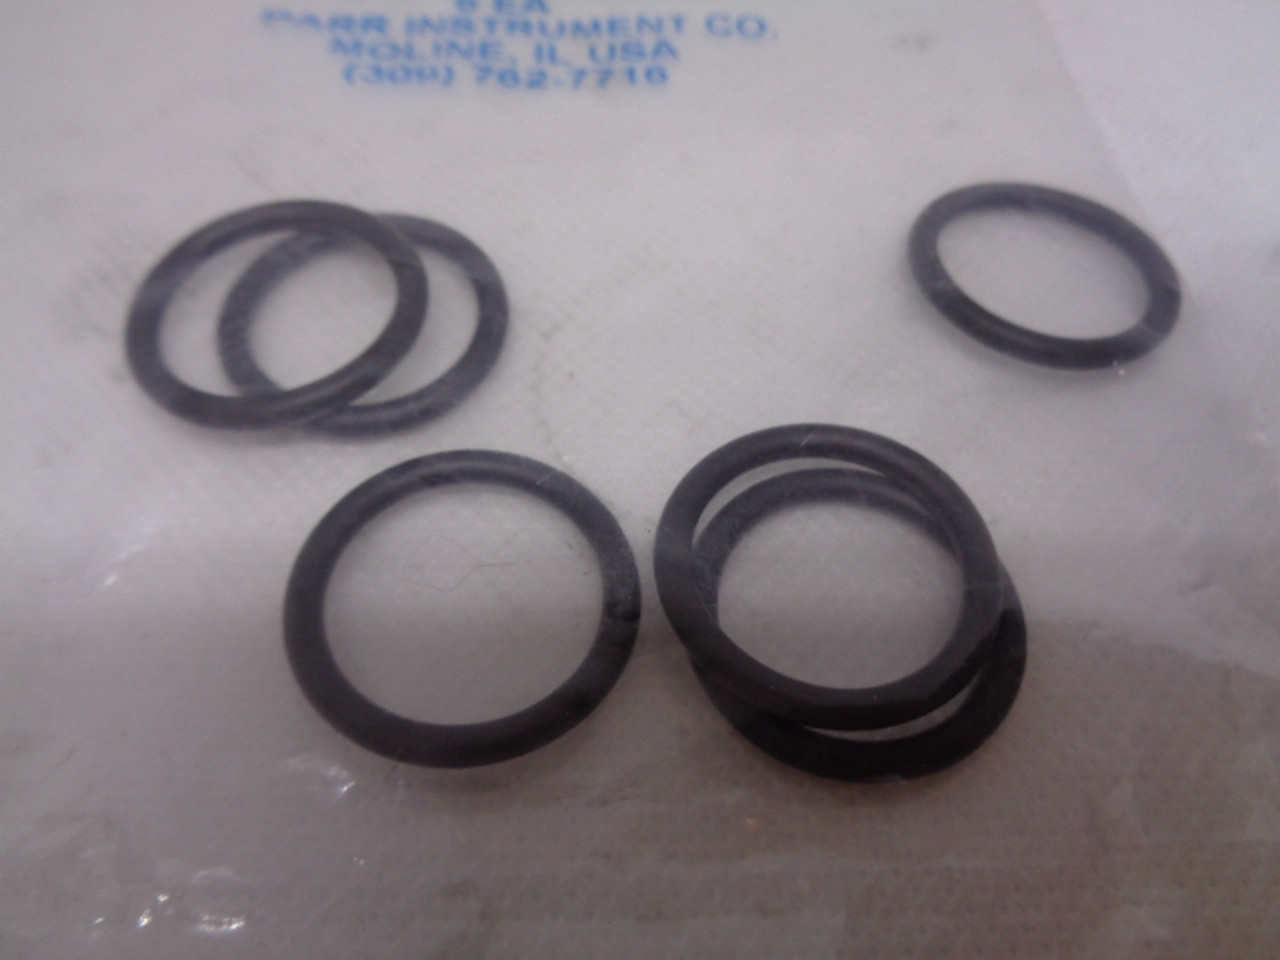 PARR 644DD O-Rings, 3/4 ID x 3/32 CS, Size: 116 (Pack of 6)